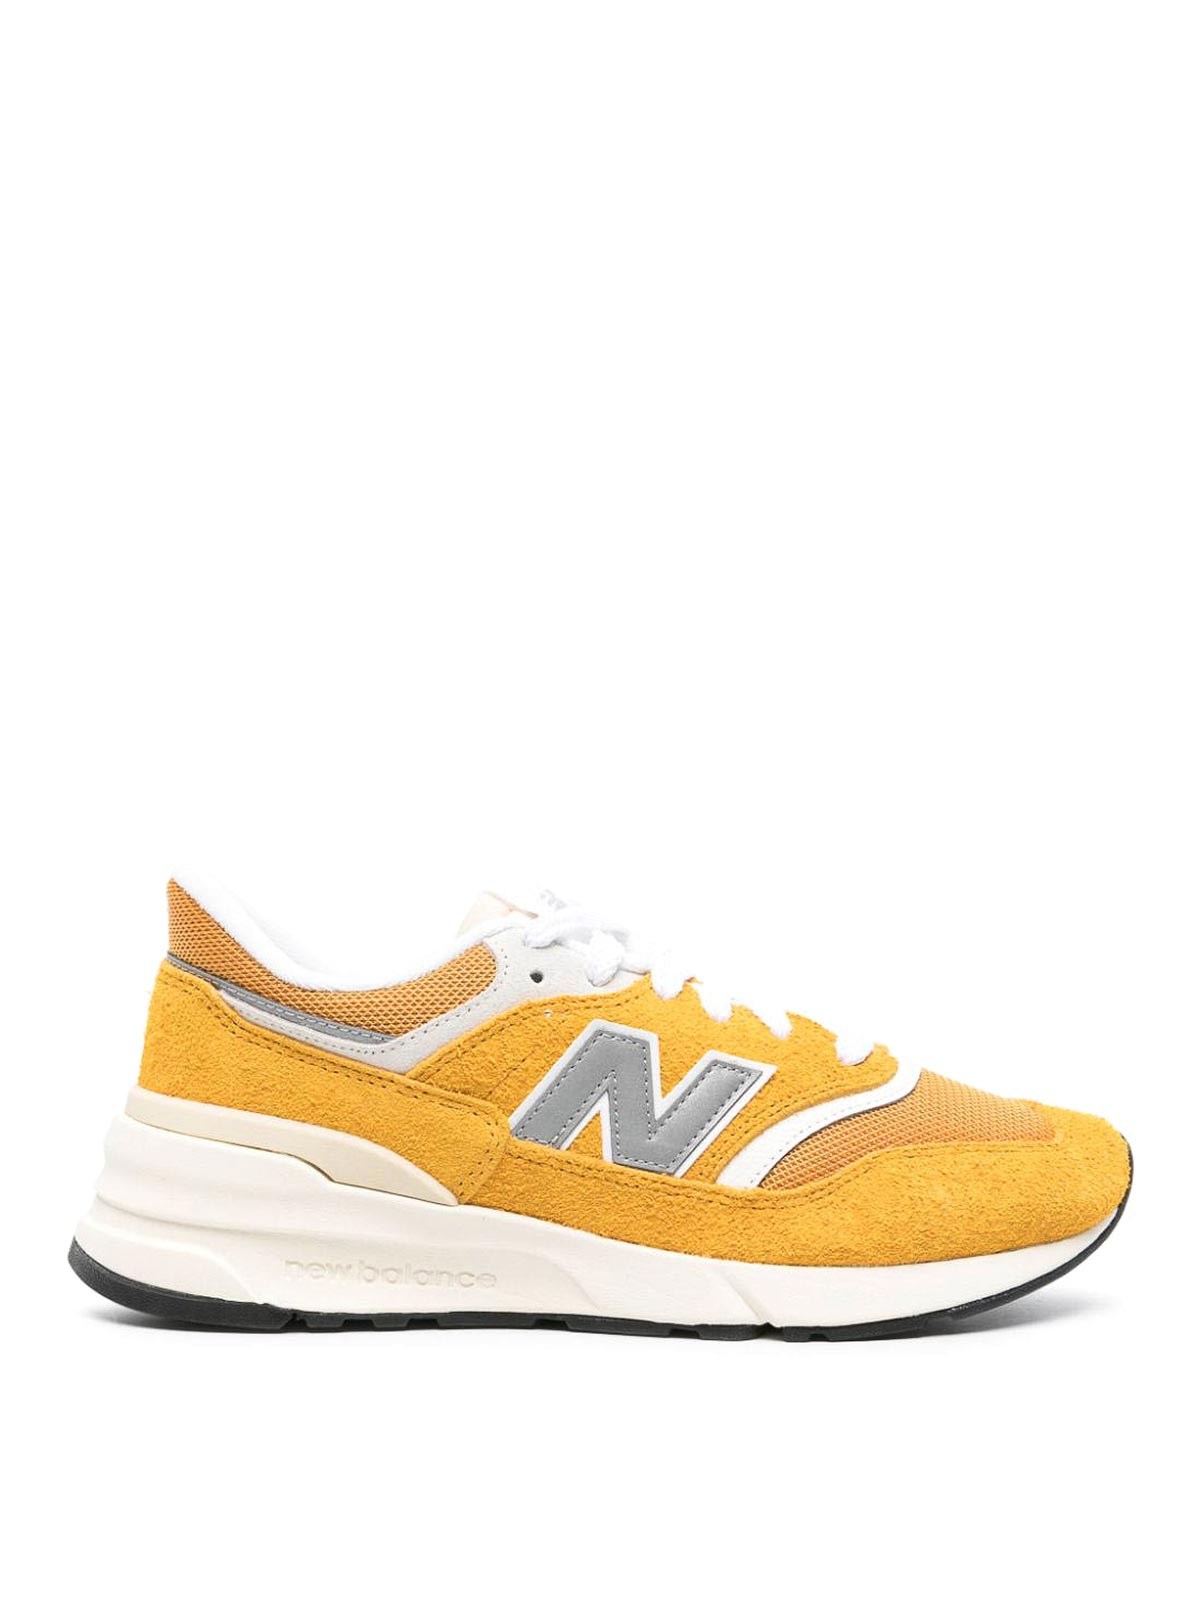 New Balance 997 Sneakers In White